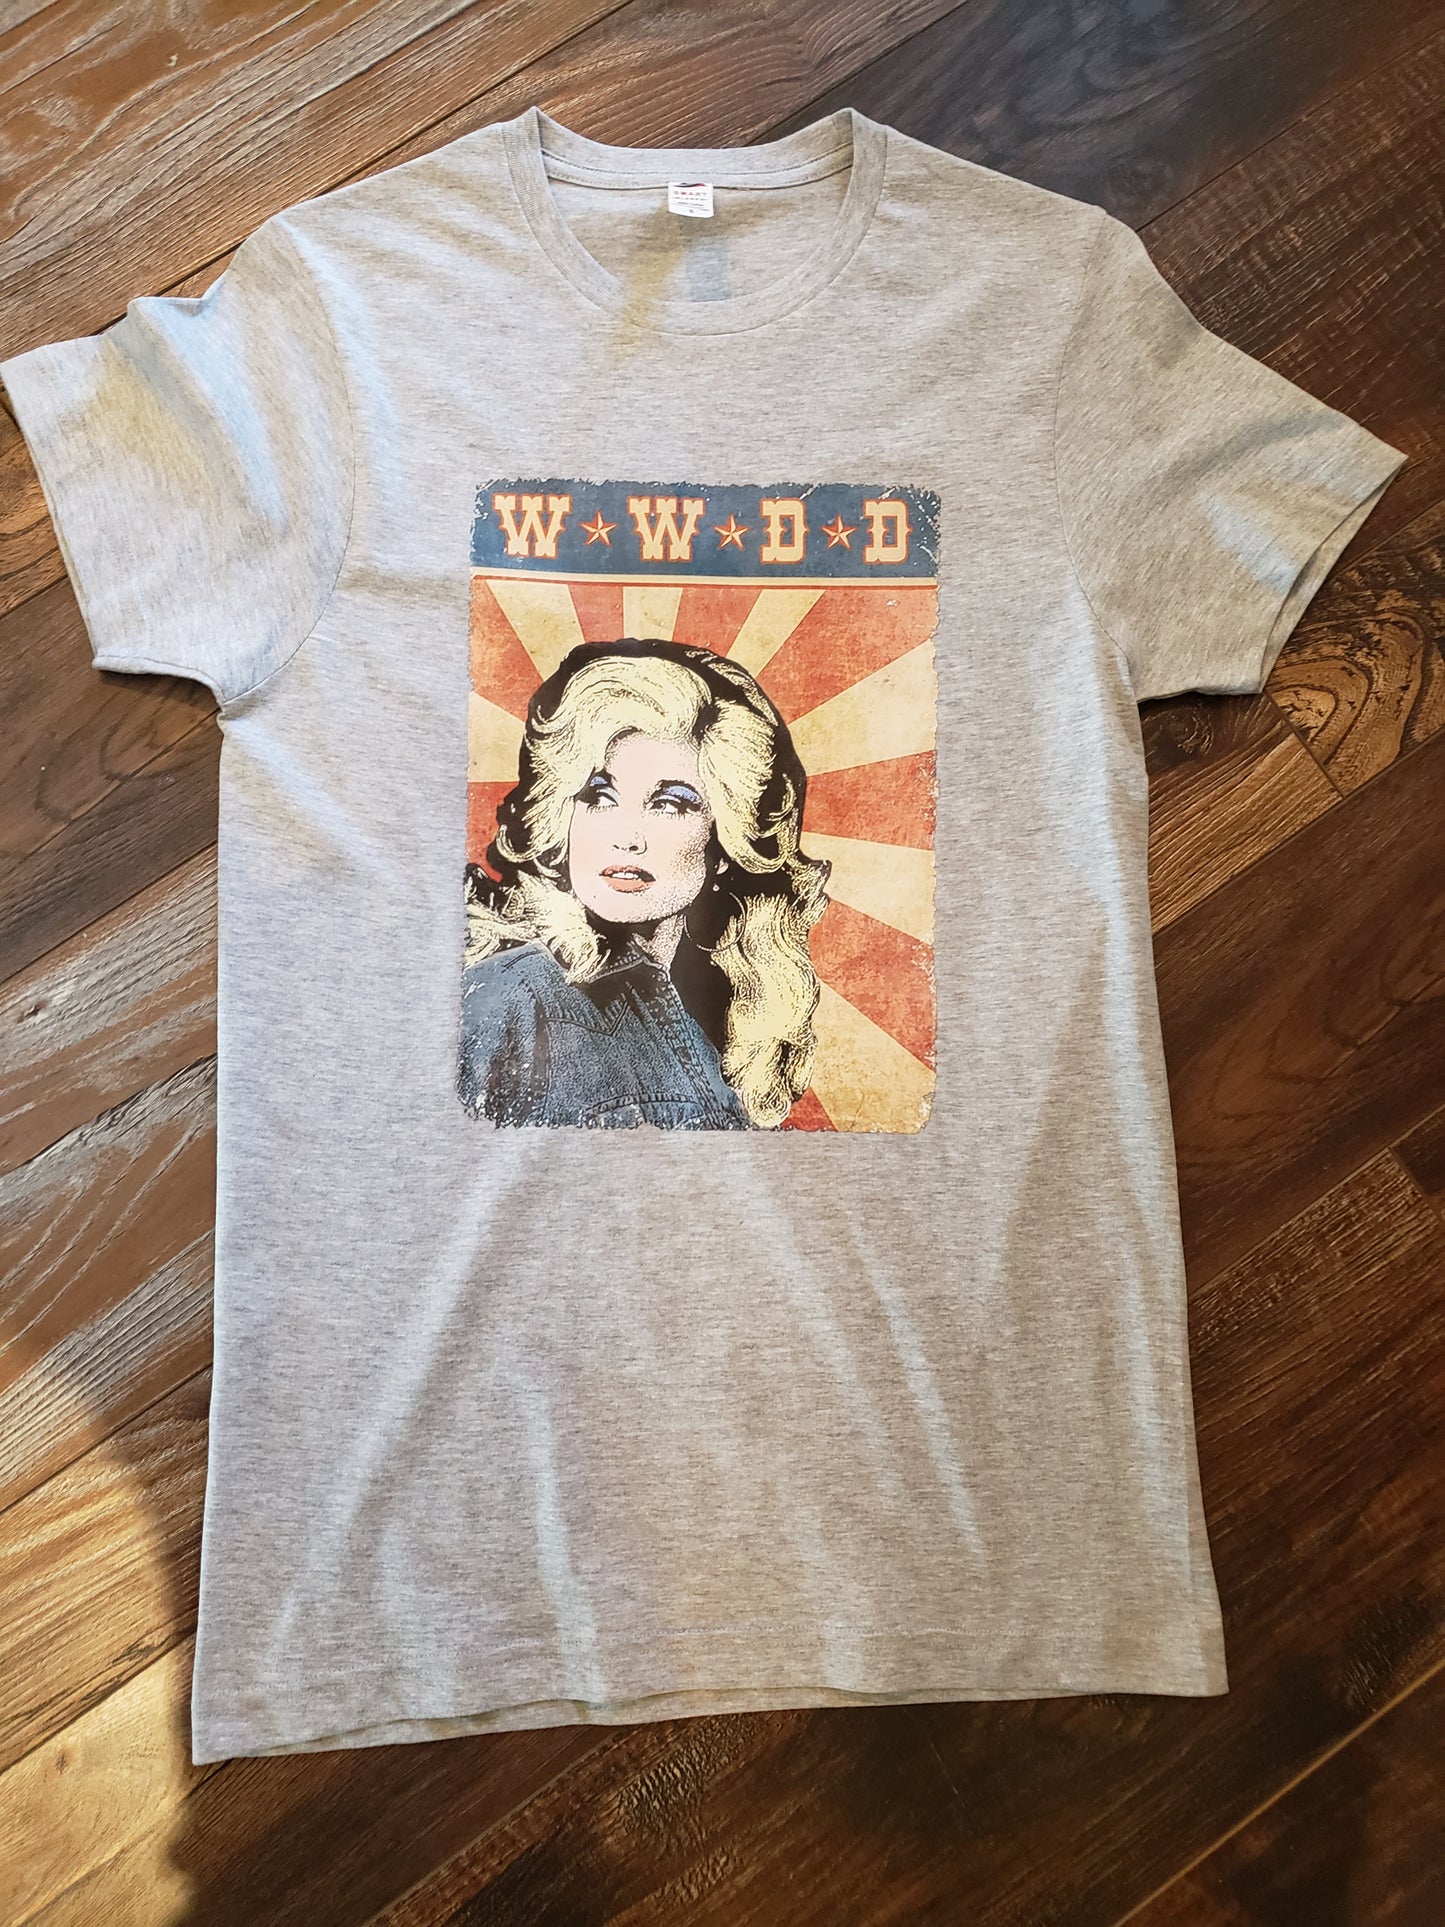 Load image into Gallery viewer, WWDD Shirt
